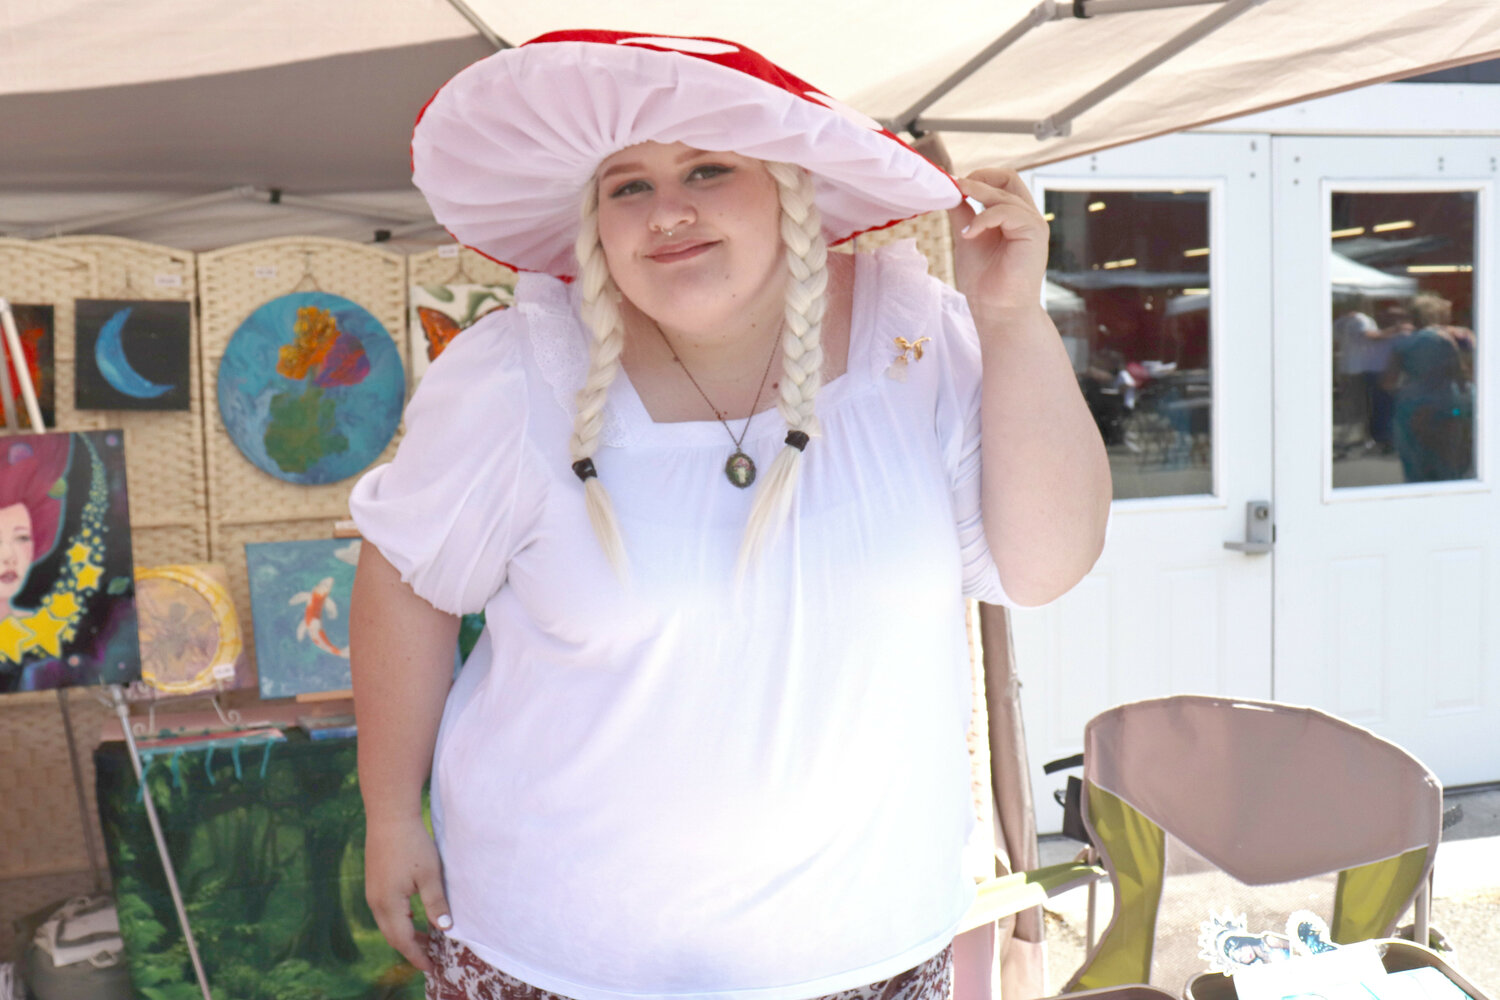 Rachel shows off her mushroom hat at the Southwest Washington Fairgrounds in Chehalis during the Centralia Fantasy Festival on Saturday, May 27.